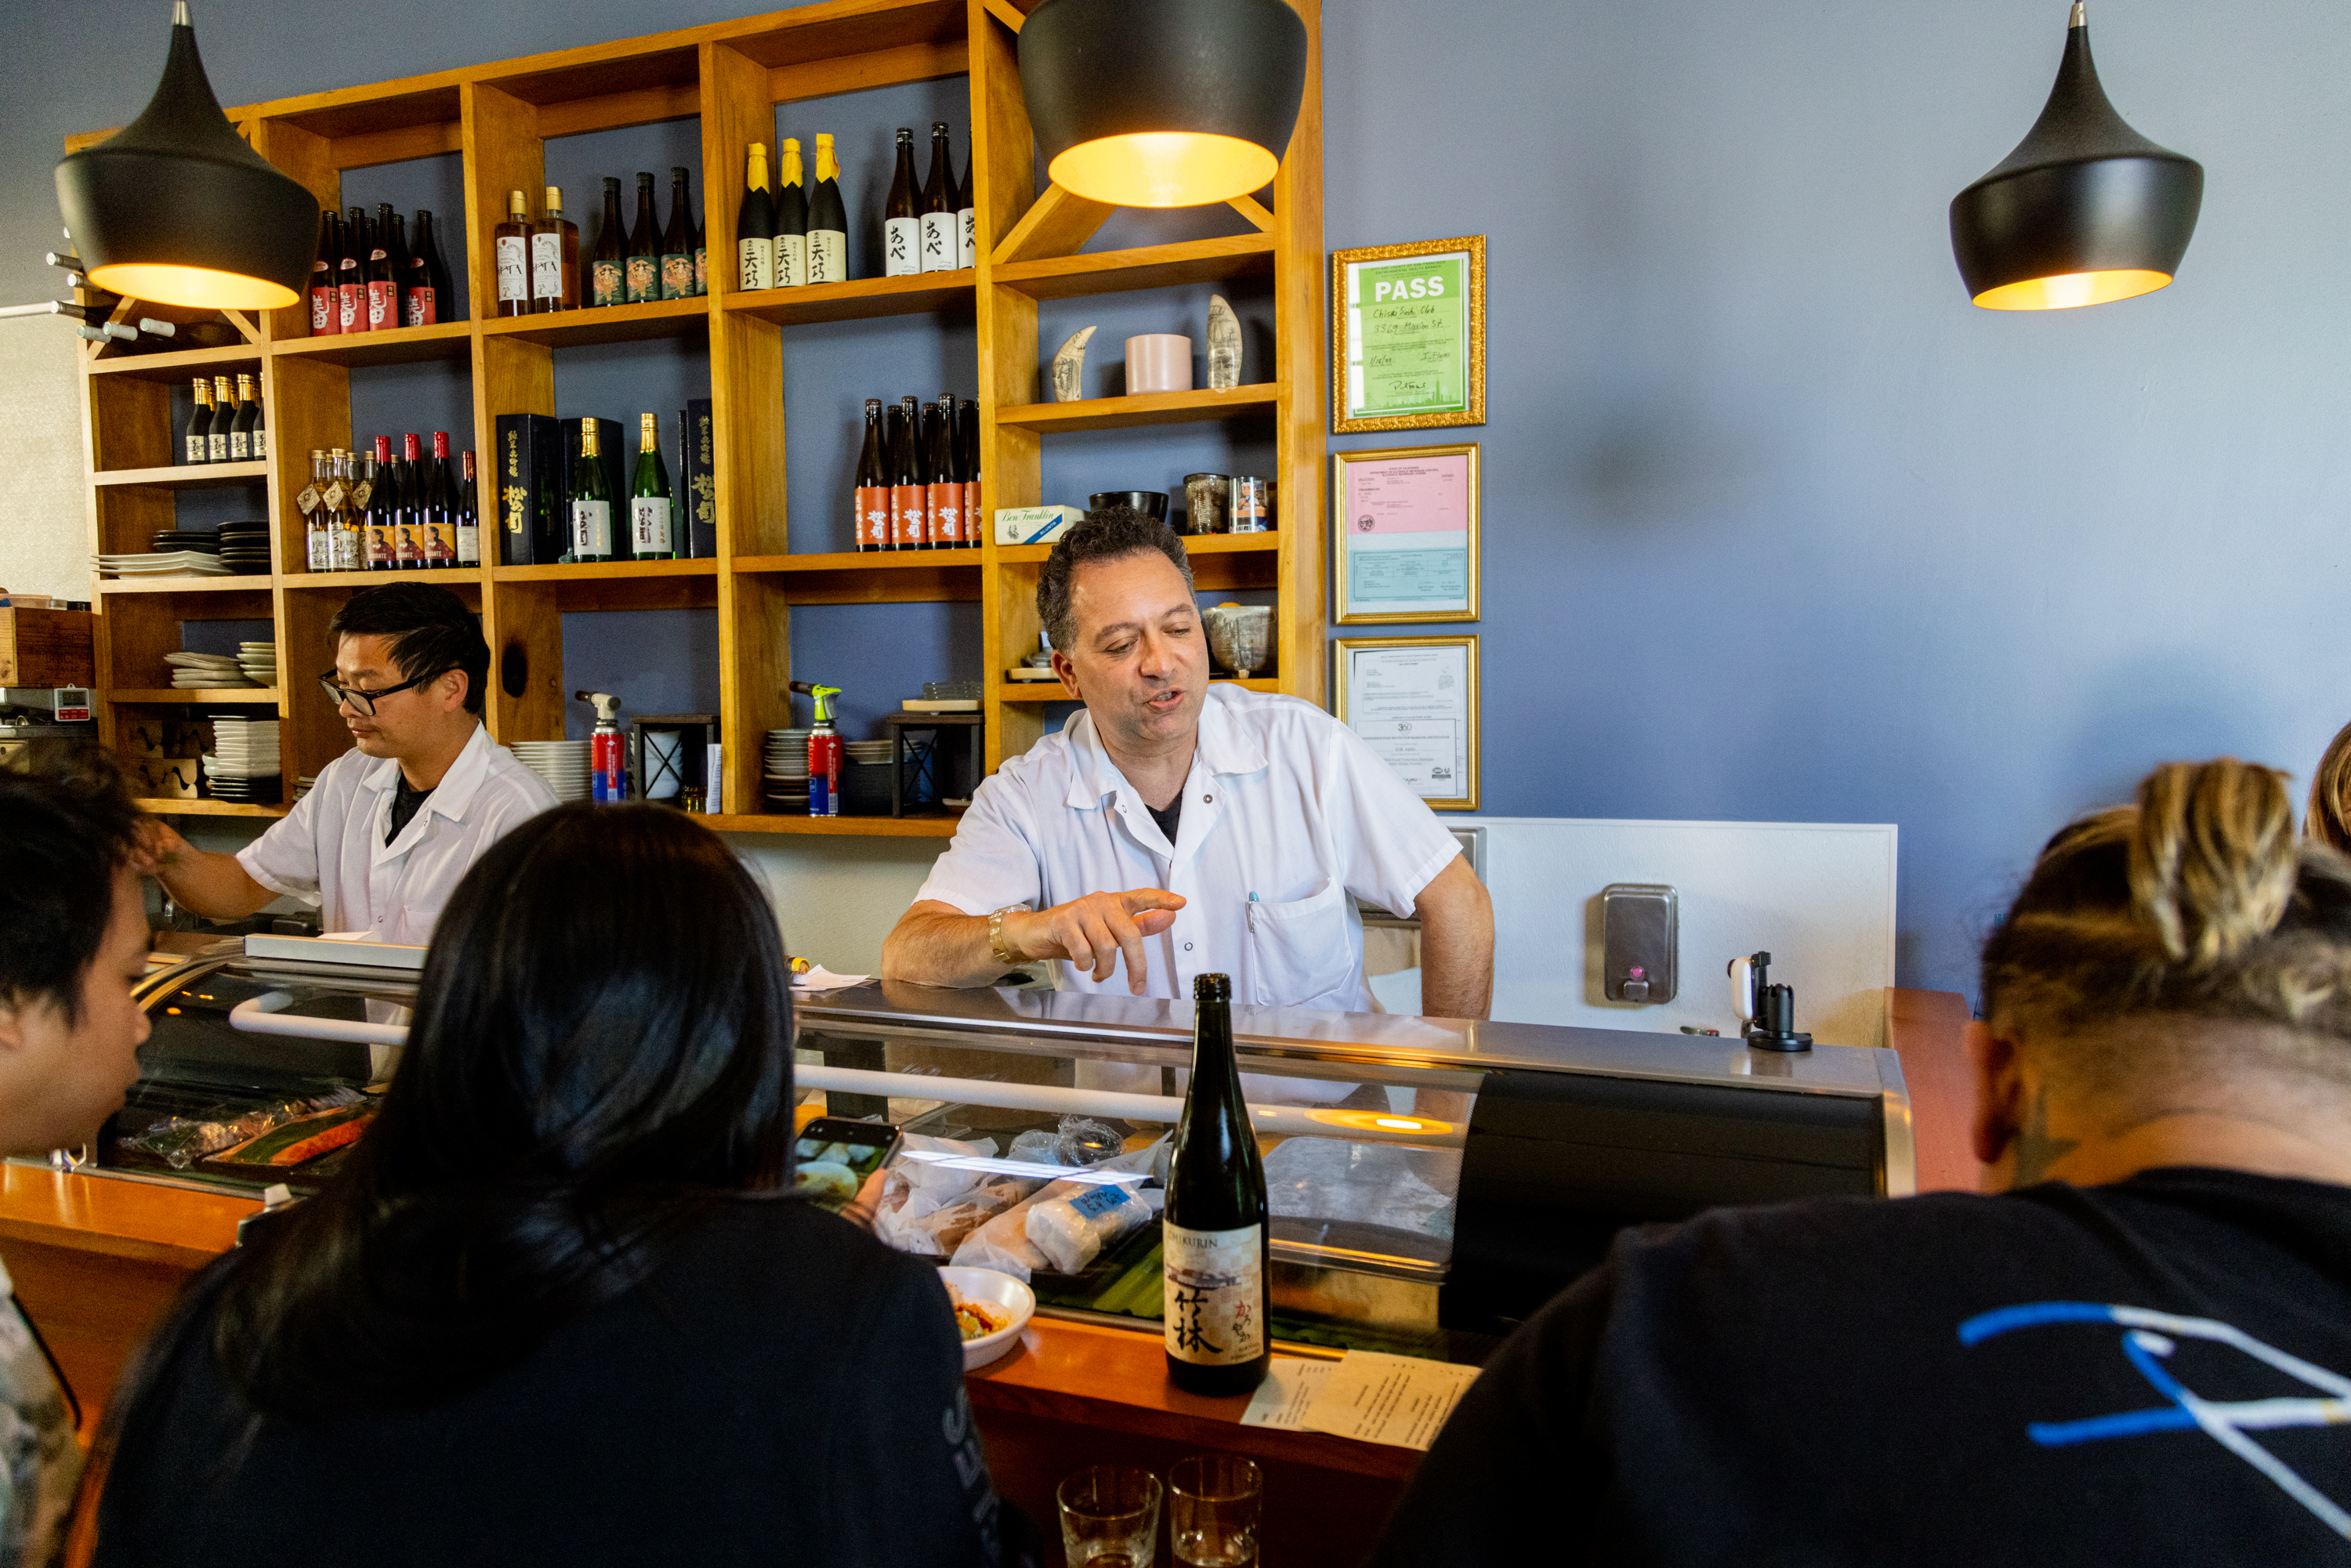 A chef in a white shirt talks to customers at a sushi bar. Bottles and dishes are displayed on shelves behind him. Another chef works nearby, preparing food.